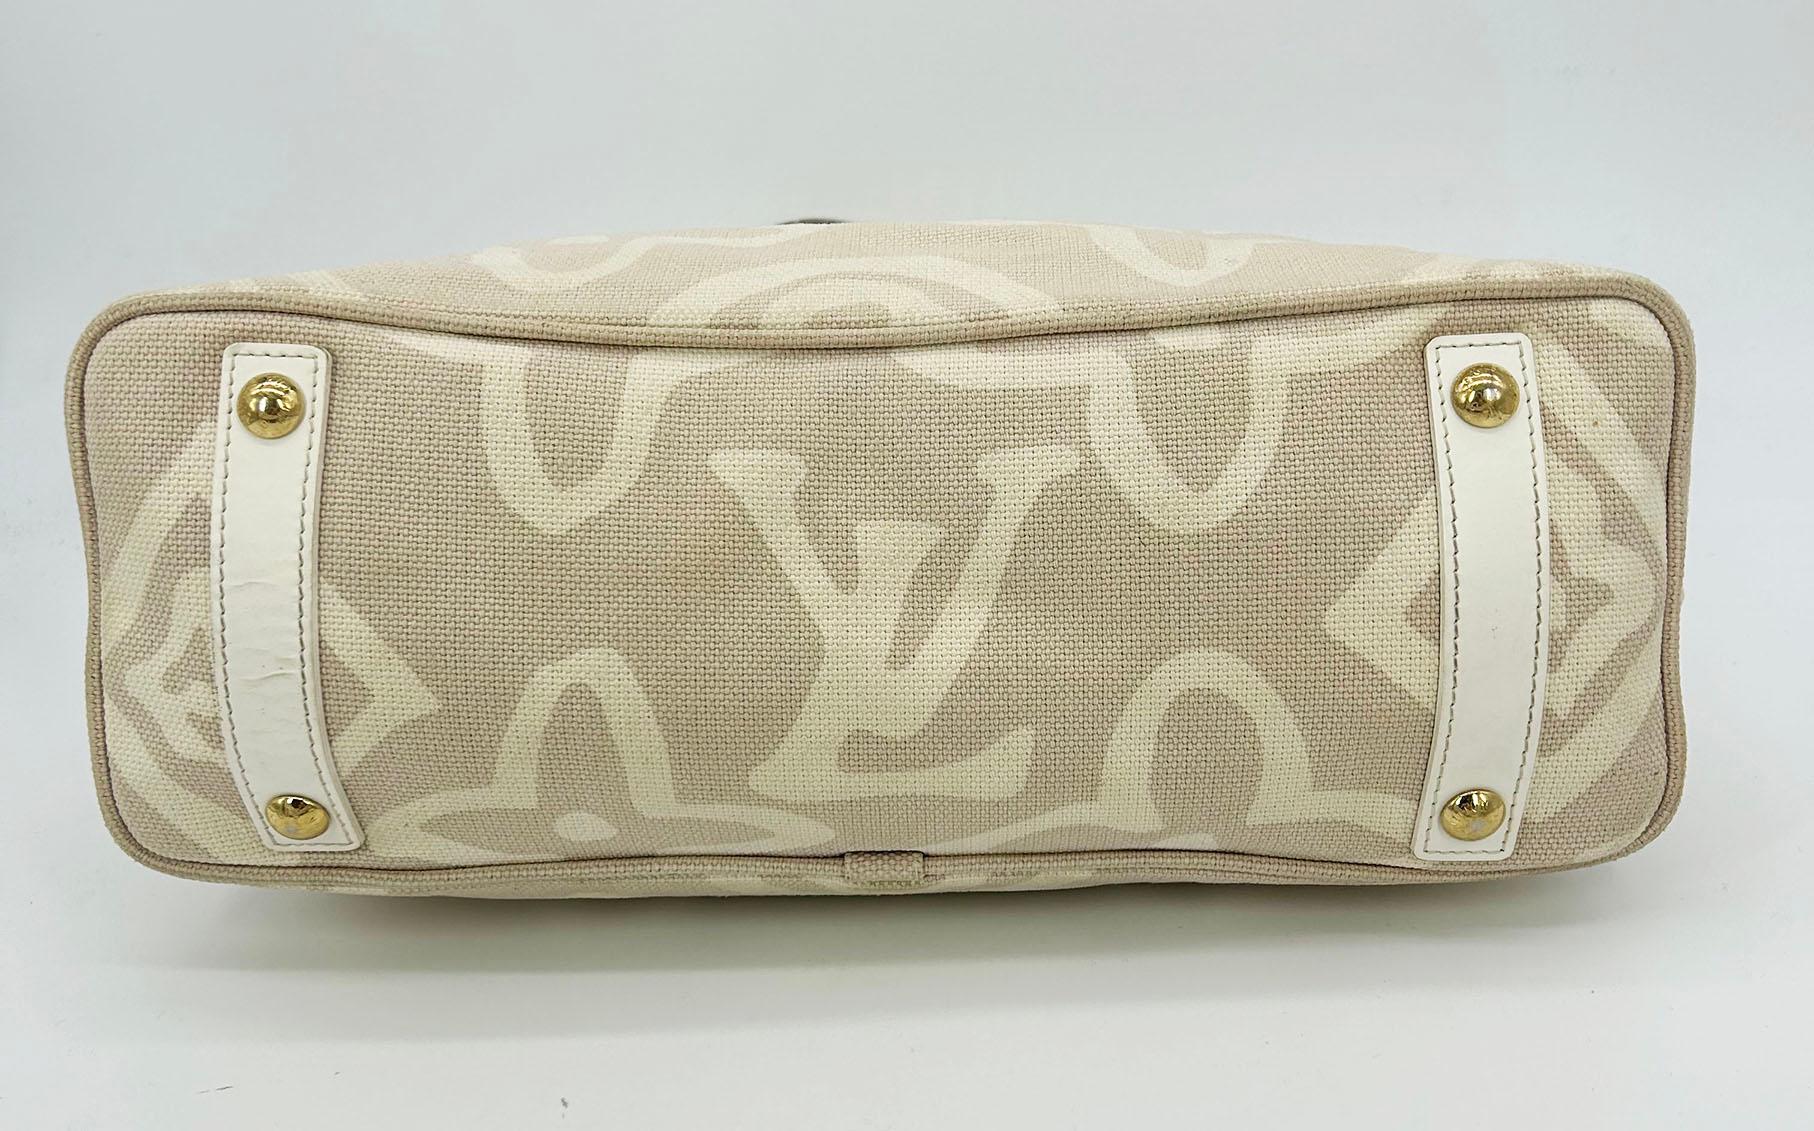 Louis Vuitton Tahitienne Cabas Bag Limited Edition In Fair Condition For Sale In Philadelphia, PA